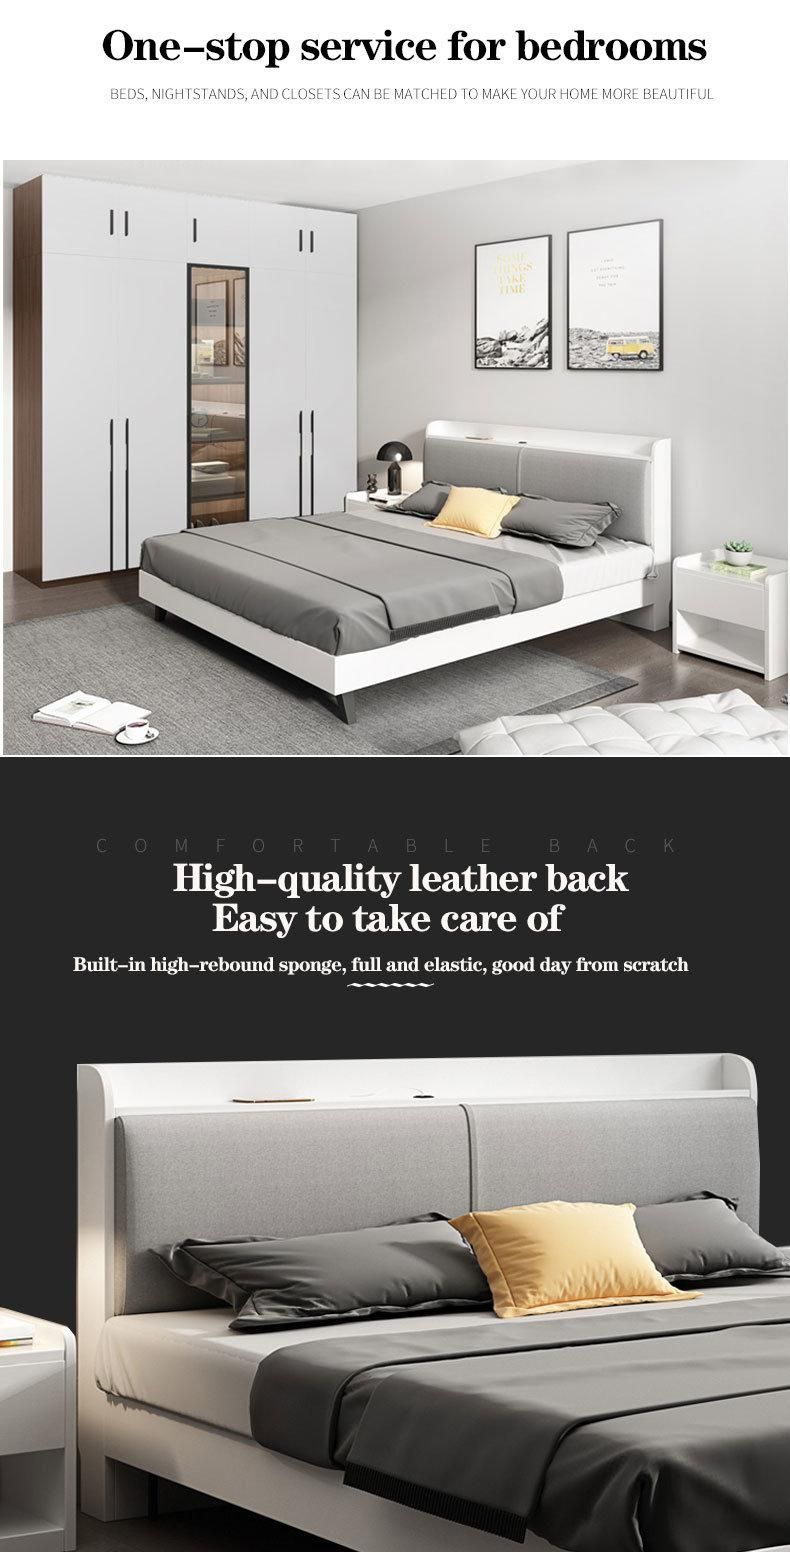 Cheapest Household Wood Bedroom Furniture Set Queen King Adult Bed